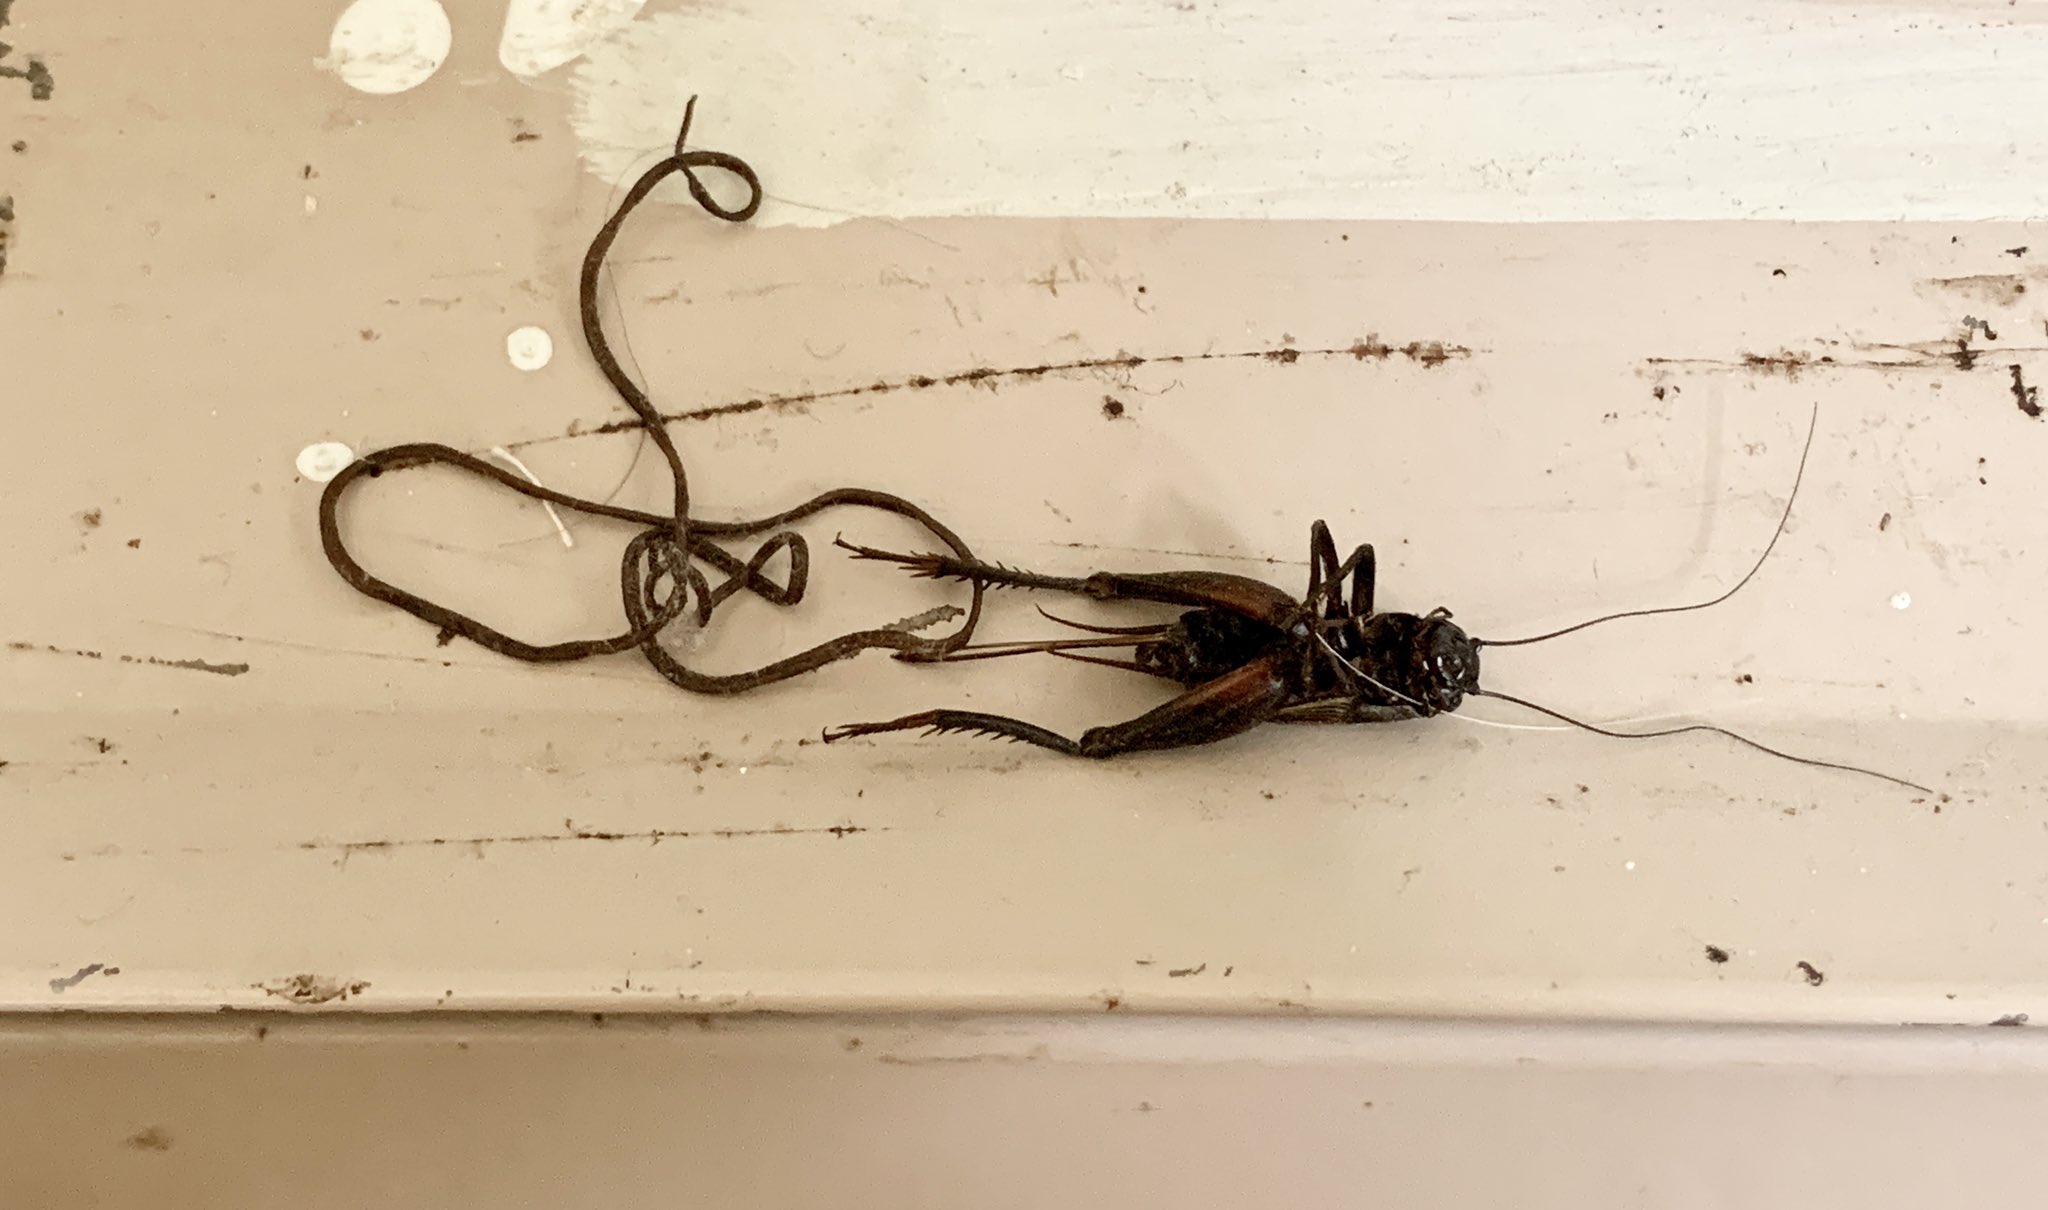 Dr. Jonathan Kolby on X: This isn't something I expected to find in my  house this morning! A dead cricket next to the parasitic horsehair worm  that came out of it. These